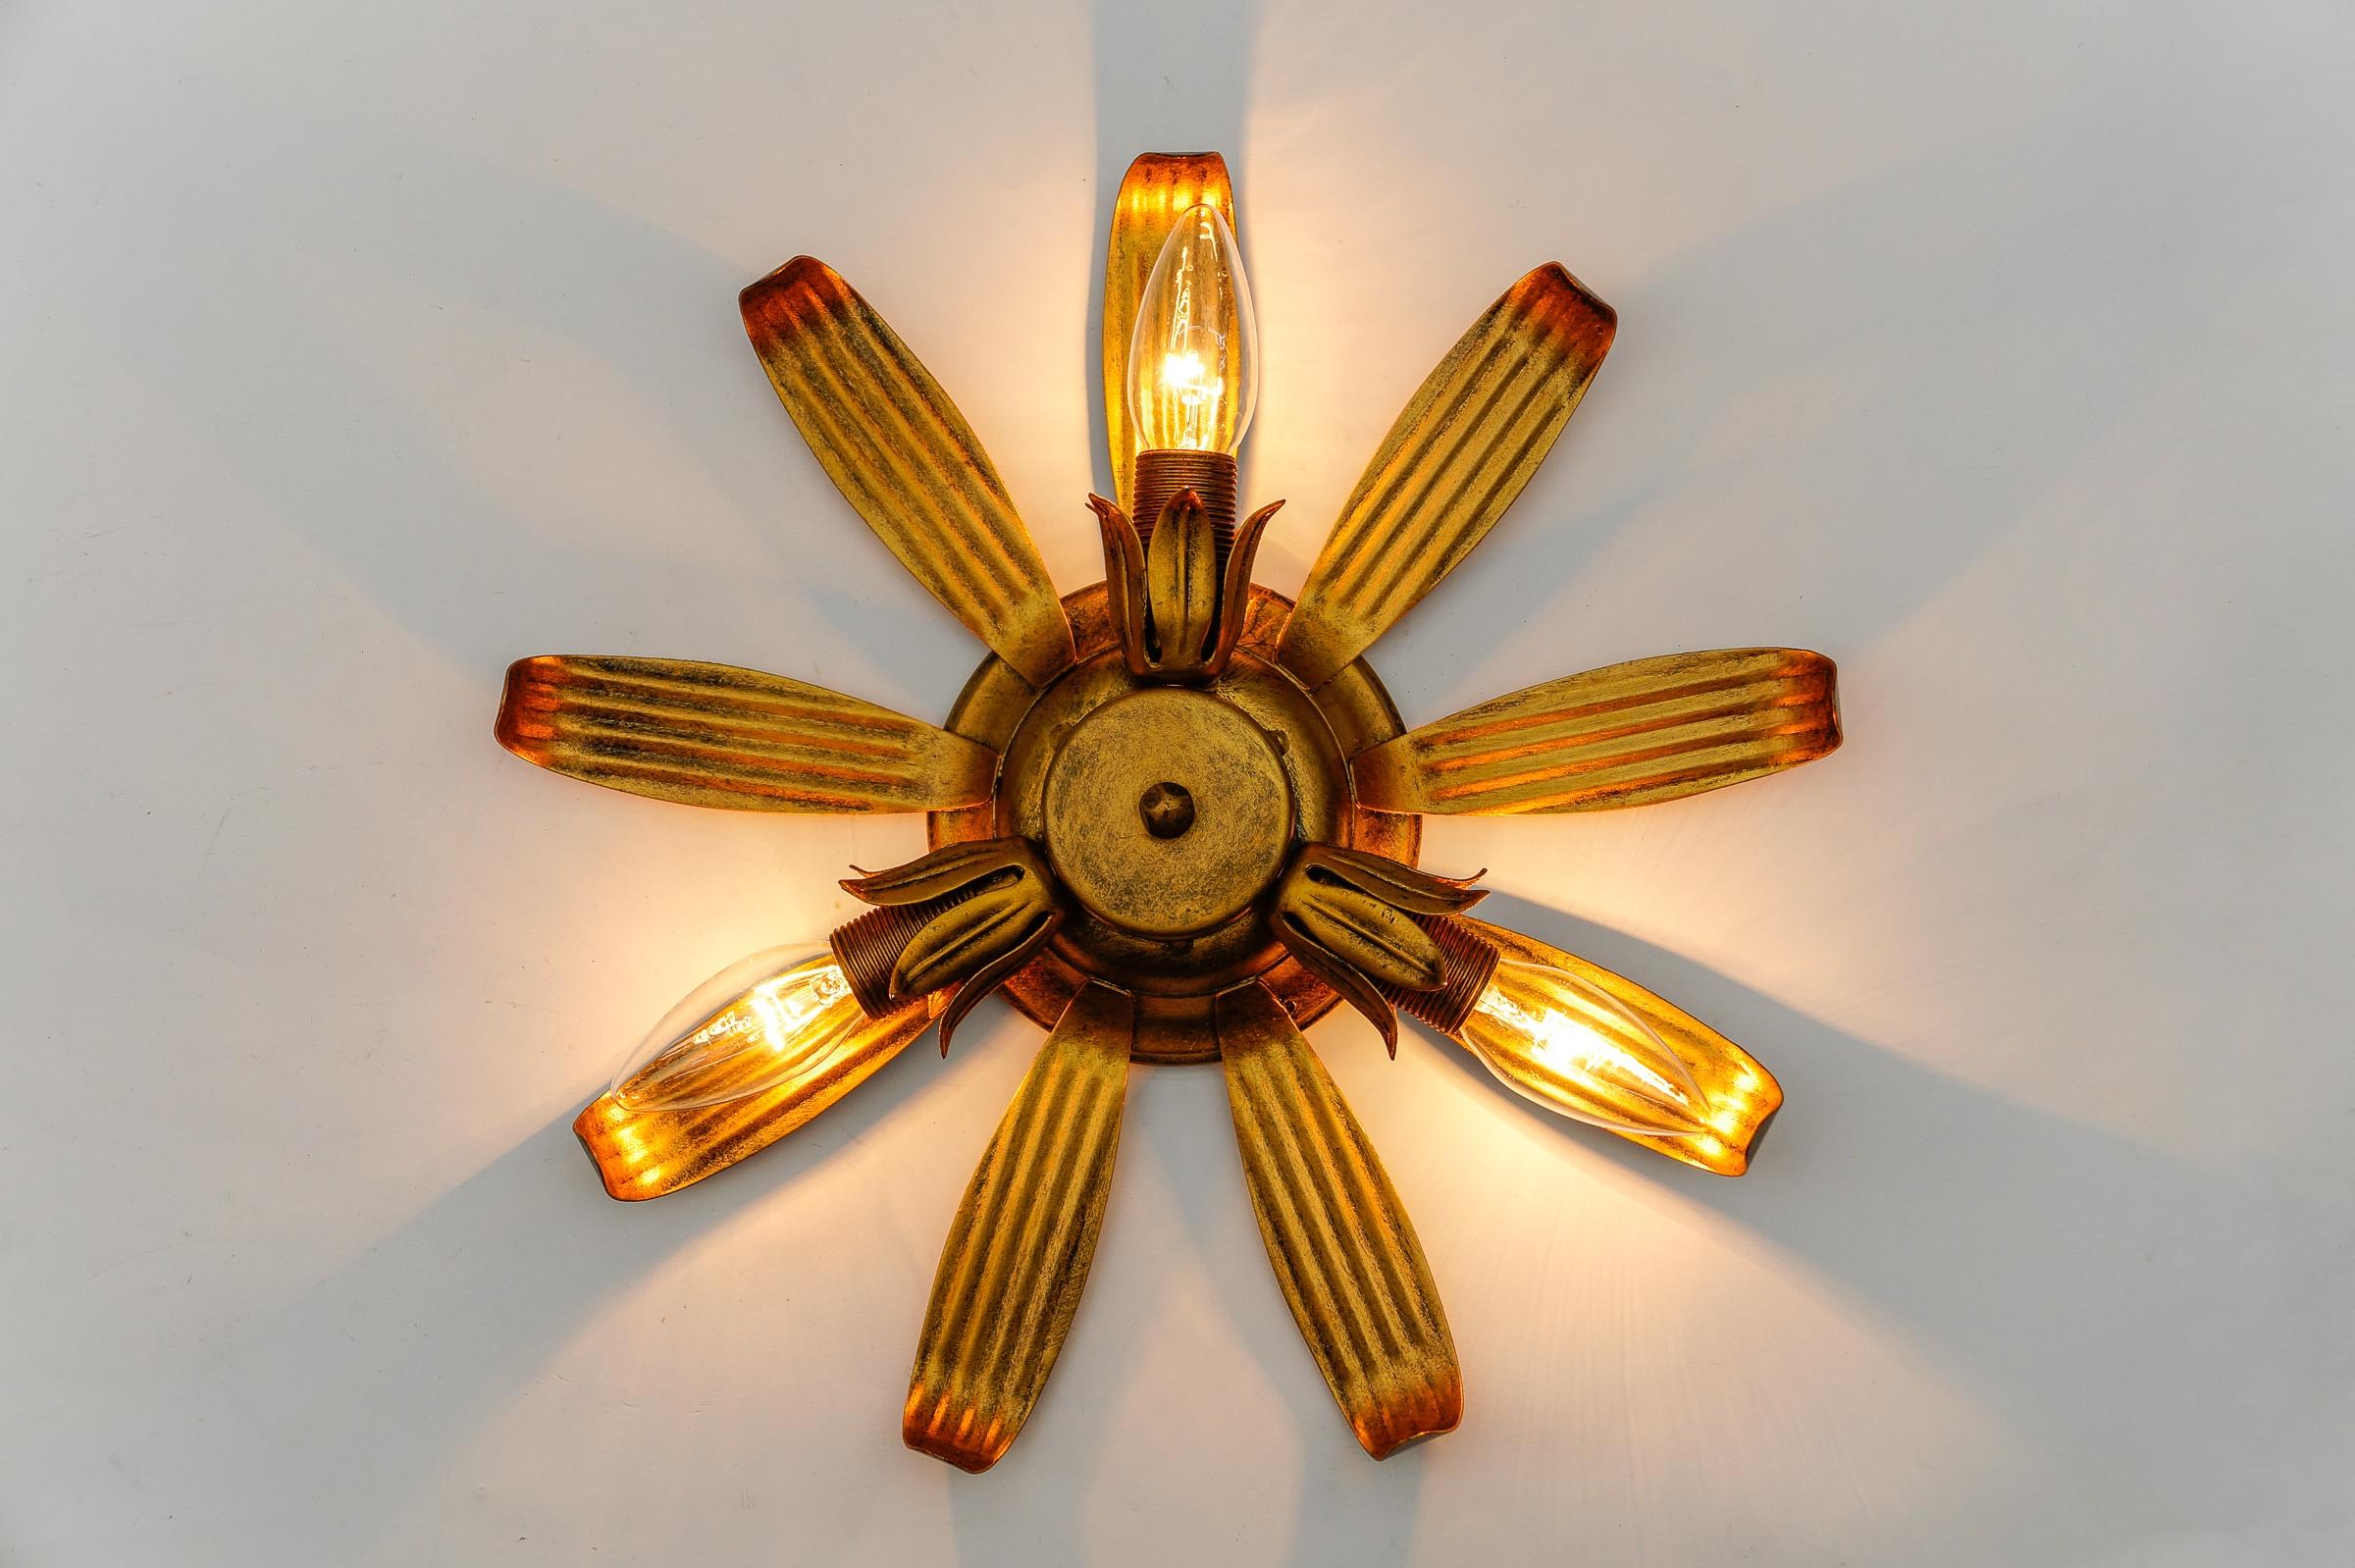 Mid-Century Modern 3-Light Sunburst Lamp, 1960 Italy

Rare and elegant midcentury ceiling lamp, 1960s. Executed in metal.

The lamp is executed with 3 x E14 Edison screw fit bulbs. It is wired and in working condition. It runs both on 110 / 230